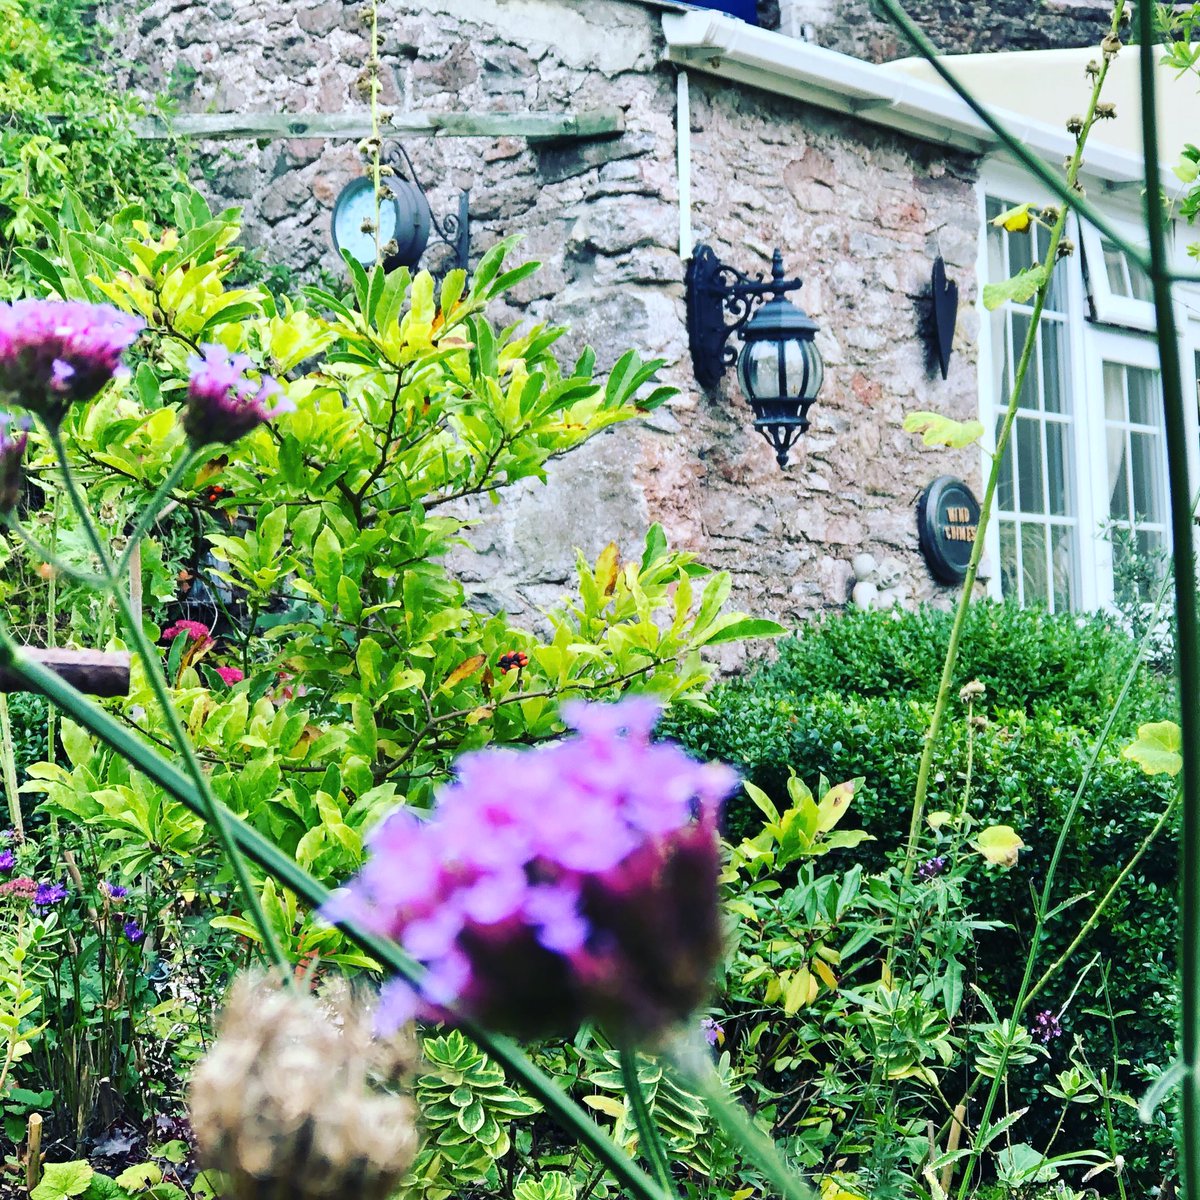 @WindchimesH fills up quickly in high season. Bows a good time to book for next year. You can do so via website!#Devon #break #holidays #Travel #solotravel #cottagesforcouples @RomanticRetreat @homeaway @Airbnb @TripAdvisorUK @VisitDevon @GuardianTravel